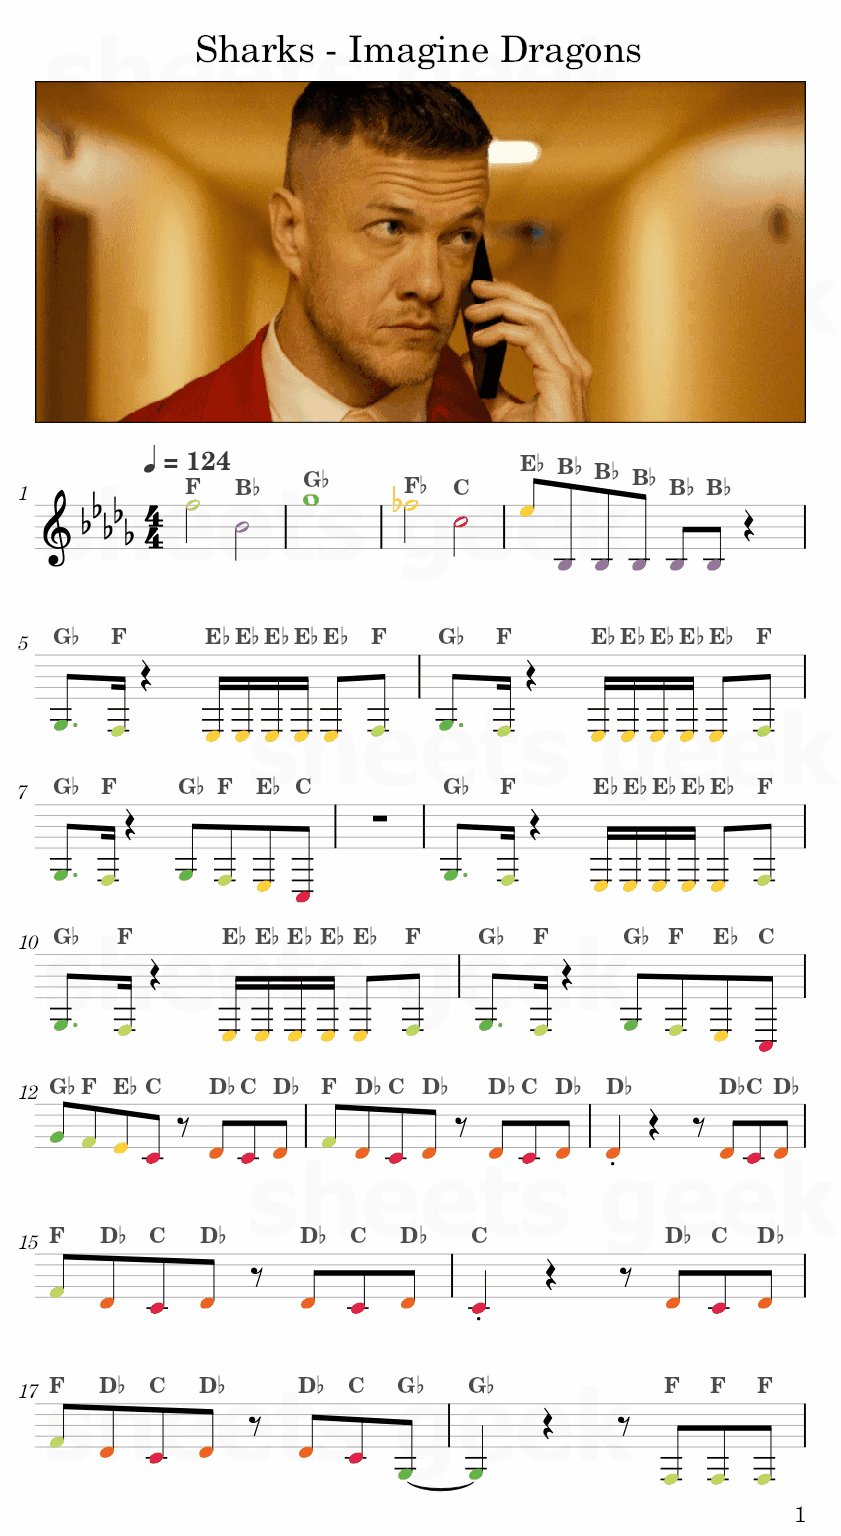 Sharks - Imagine Dragons Easy Sheet Music Free for piano, keyboard, flute, violin, sax, cello page 1